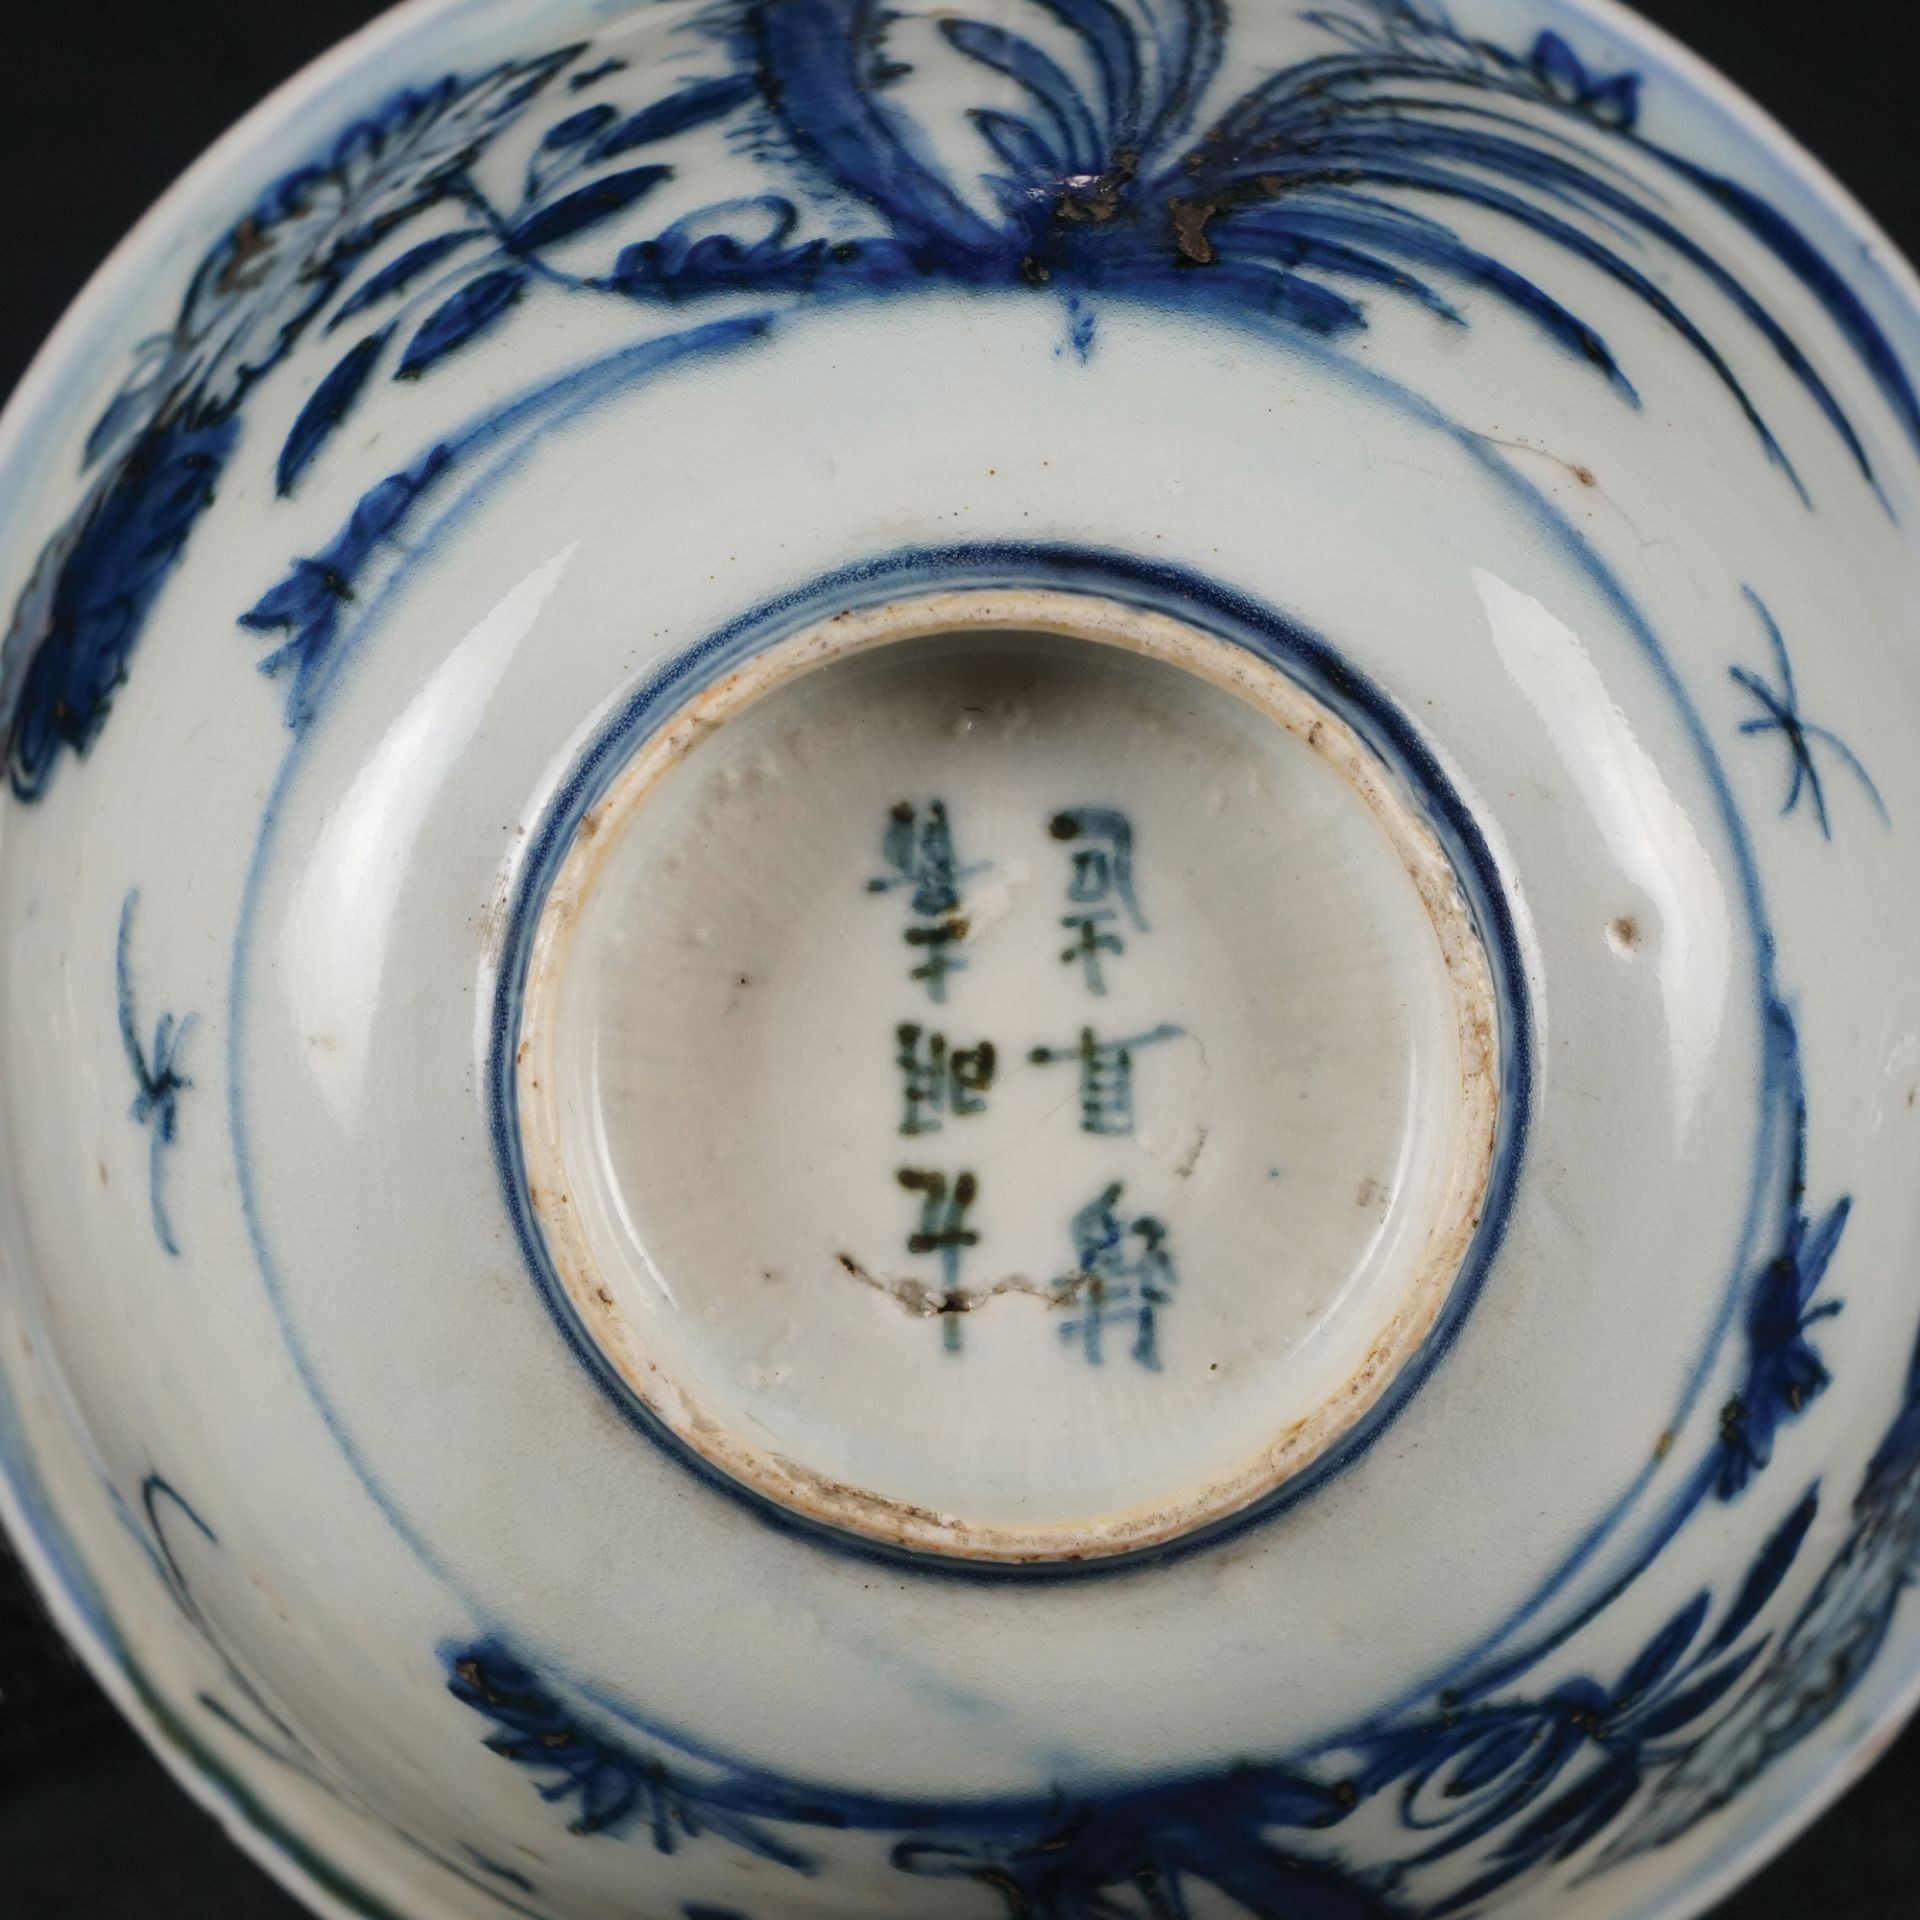 A Chinese white and blue porcelain bowl, Ming dinasty, end of 16th century - Bild 3 aus 3